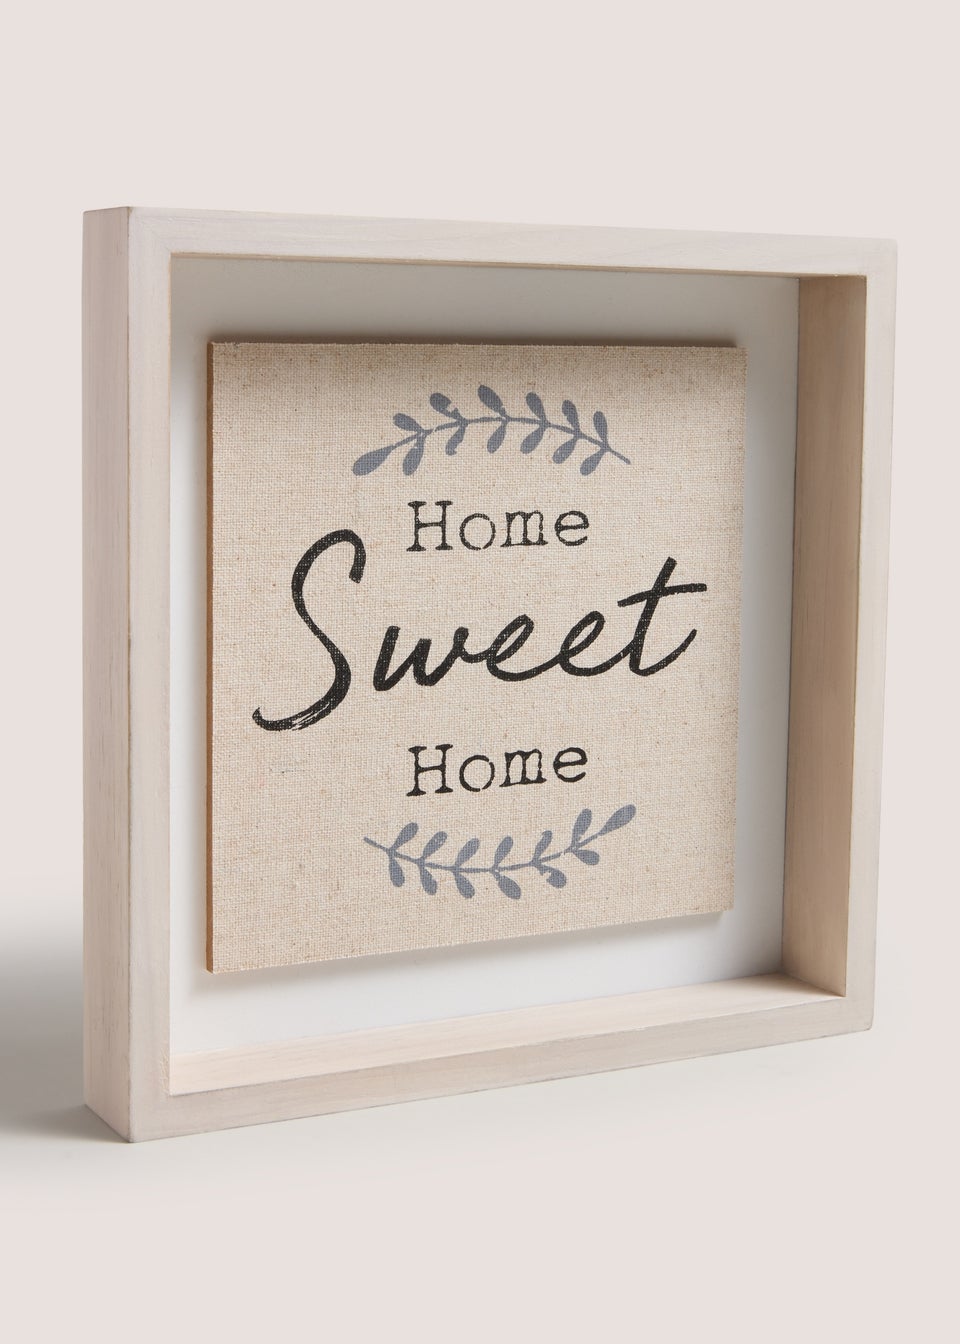 Home Sweet Home Cottage Wood Sign (25.4cm x 25.4cm x 38cm)